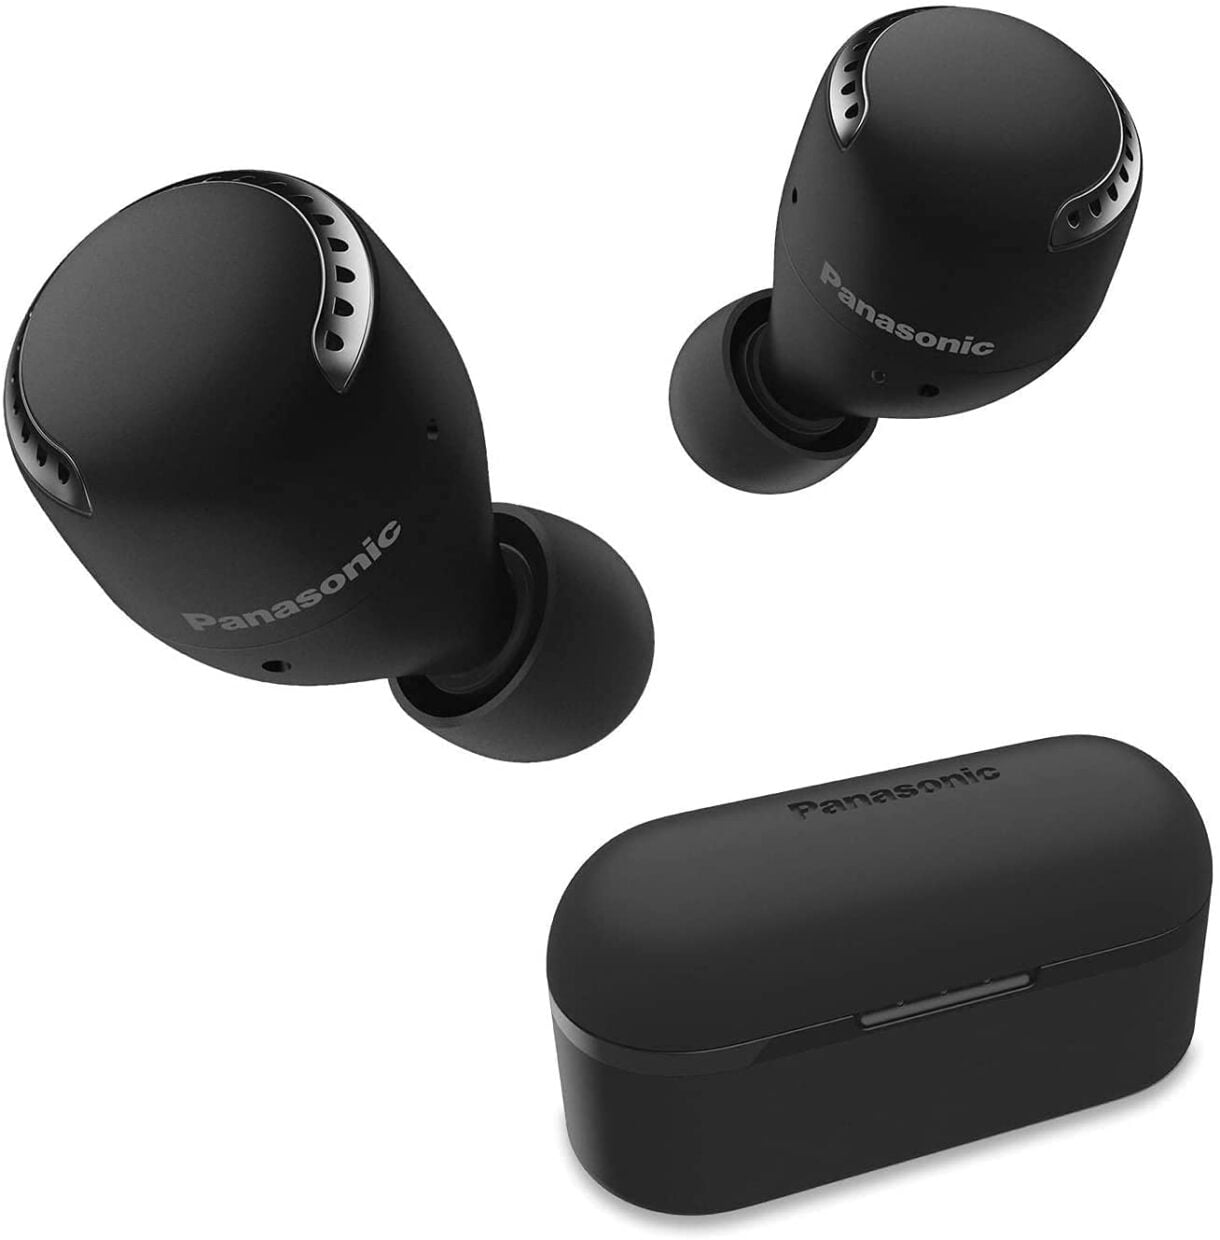 Panasonic True Wireless Earbuds, Noise Cancelling Bluetooth Headphones, IPX4 Water Resistant and Compatible with Alexa, Charging Case Included - RZ-S500WGE-K